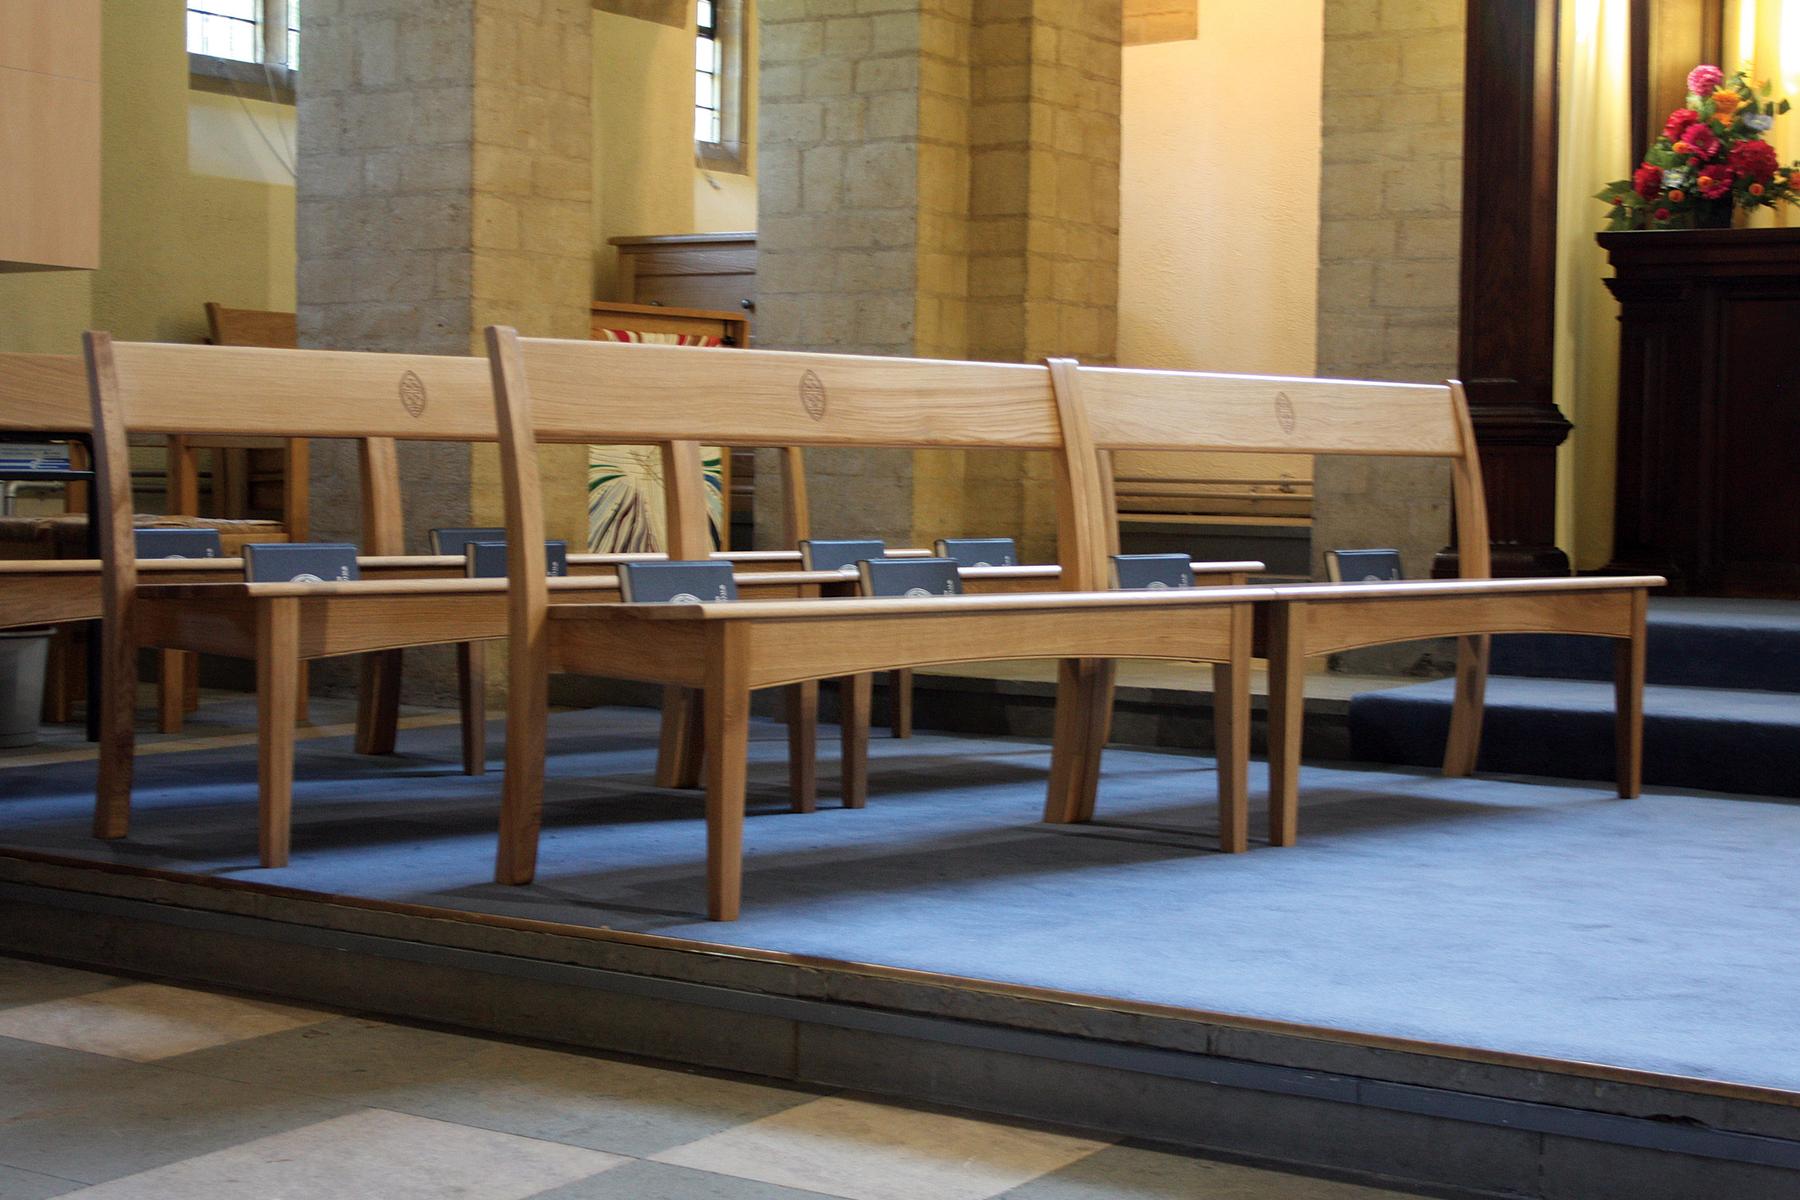 Wycombe Abbey School benches